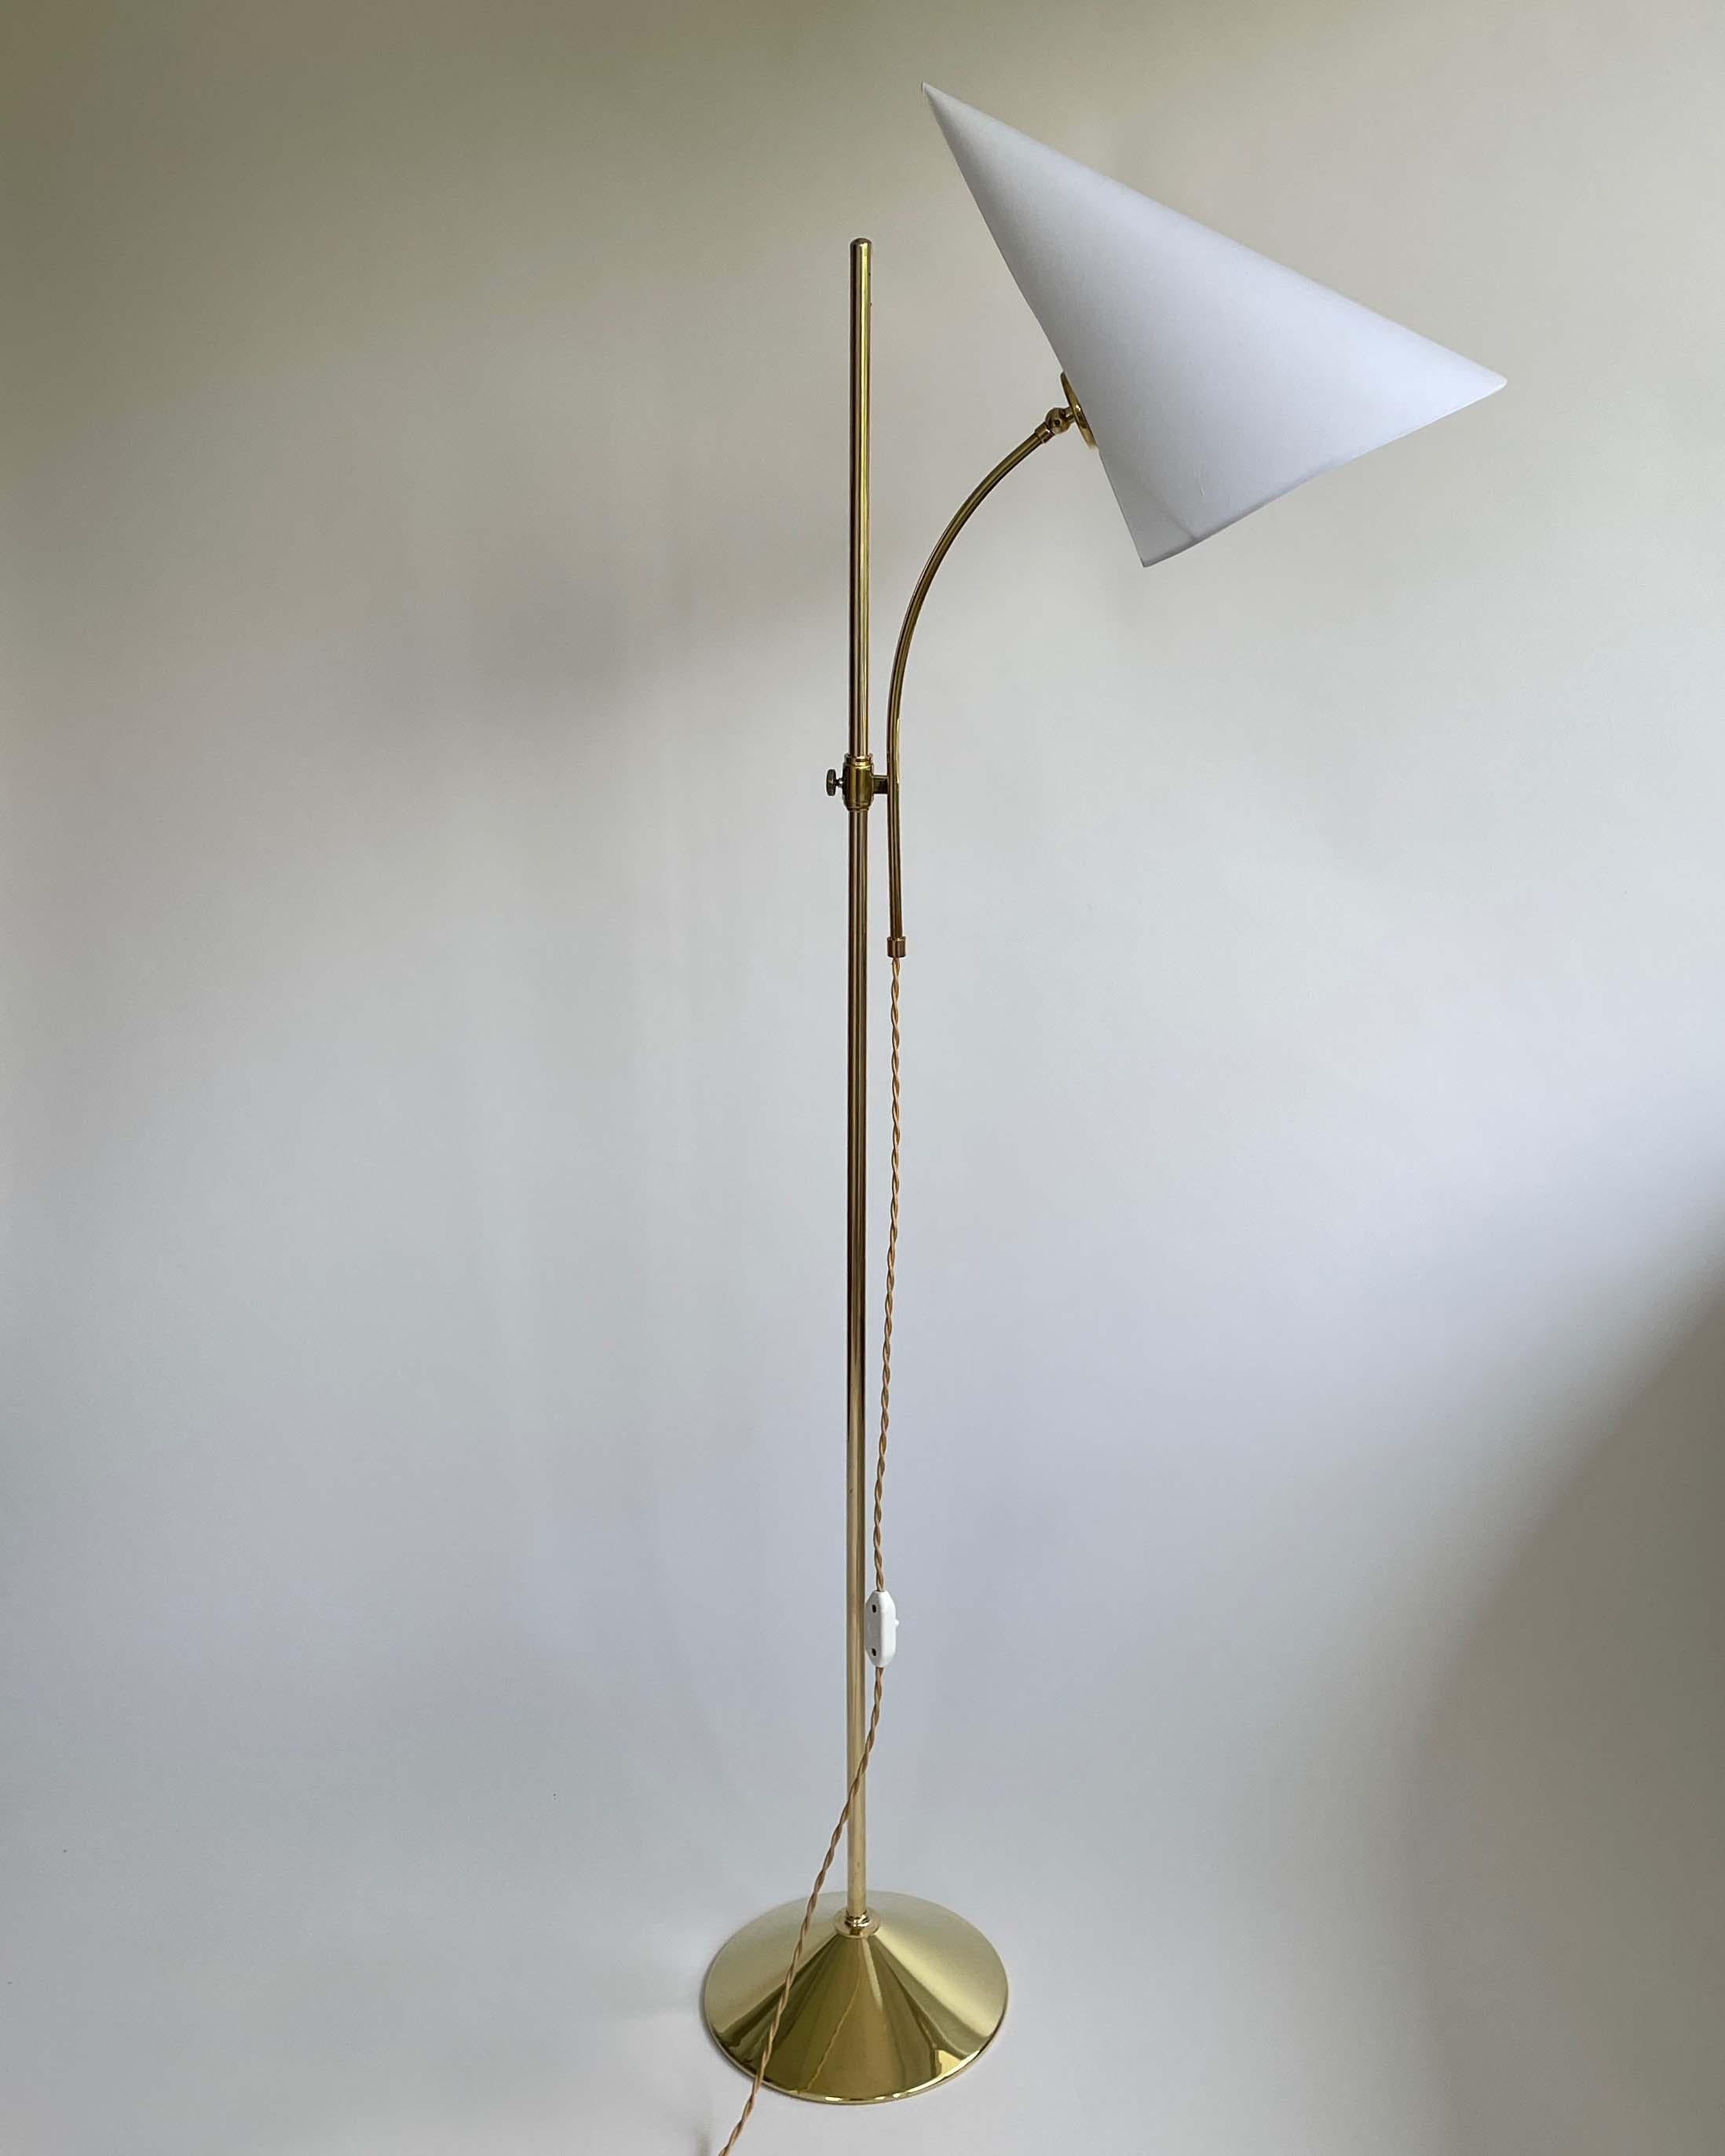 This unusual Scandinavian Modern floor lamp was designed and manufactured in Sweden in the 1950s. It features a brass base with height adjustable white cotton lampshade. 

The light requires one E27 bulbs up to 60 Watt (LED recommended). It has been